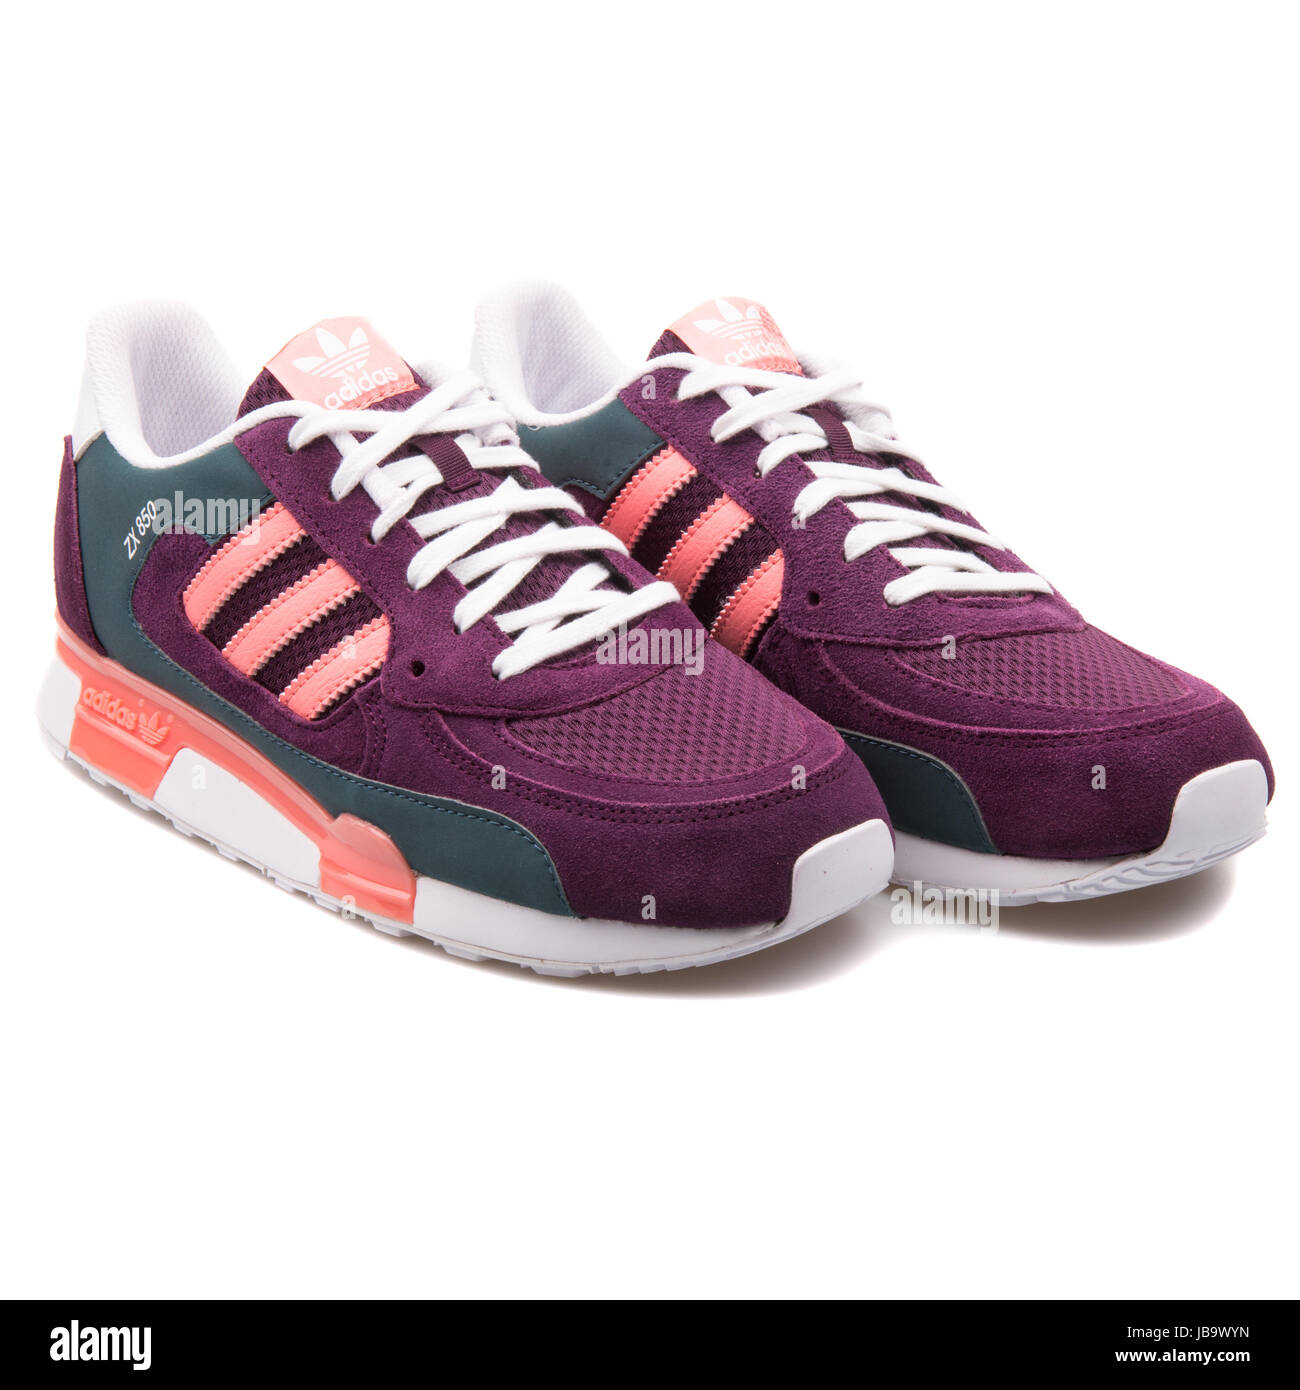 adidas zx 850 violet homme